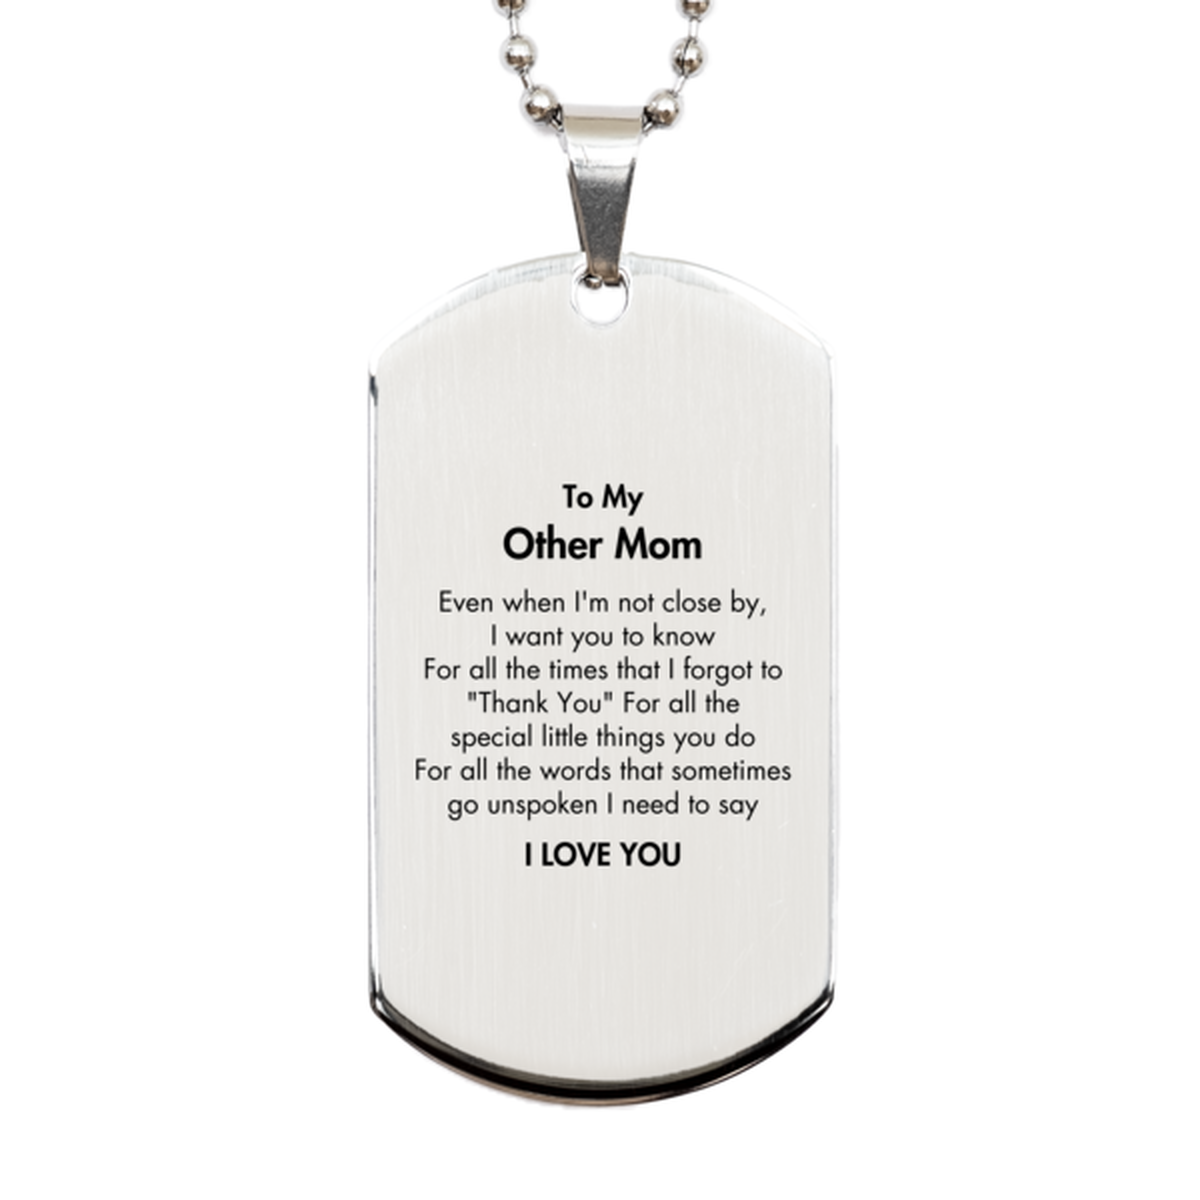 Thank You Gifts for Other Mom, Keepsake Silver Dog Tag Gifts for Other Mom Birthday Mother's day Father's Day Other Mom For all the words That sometimes go unspoken I need to say I LOVE YOU